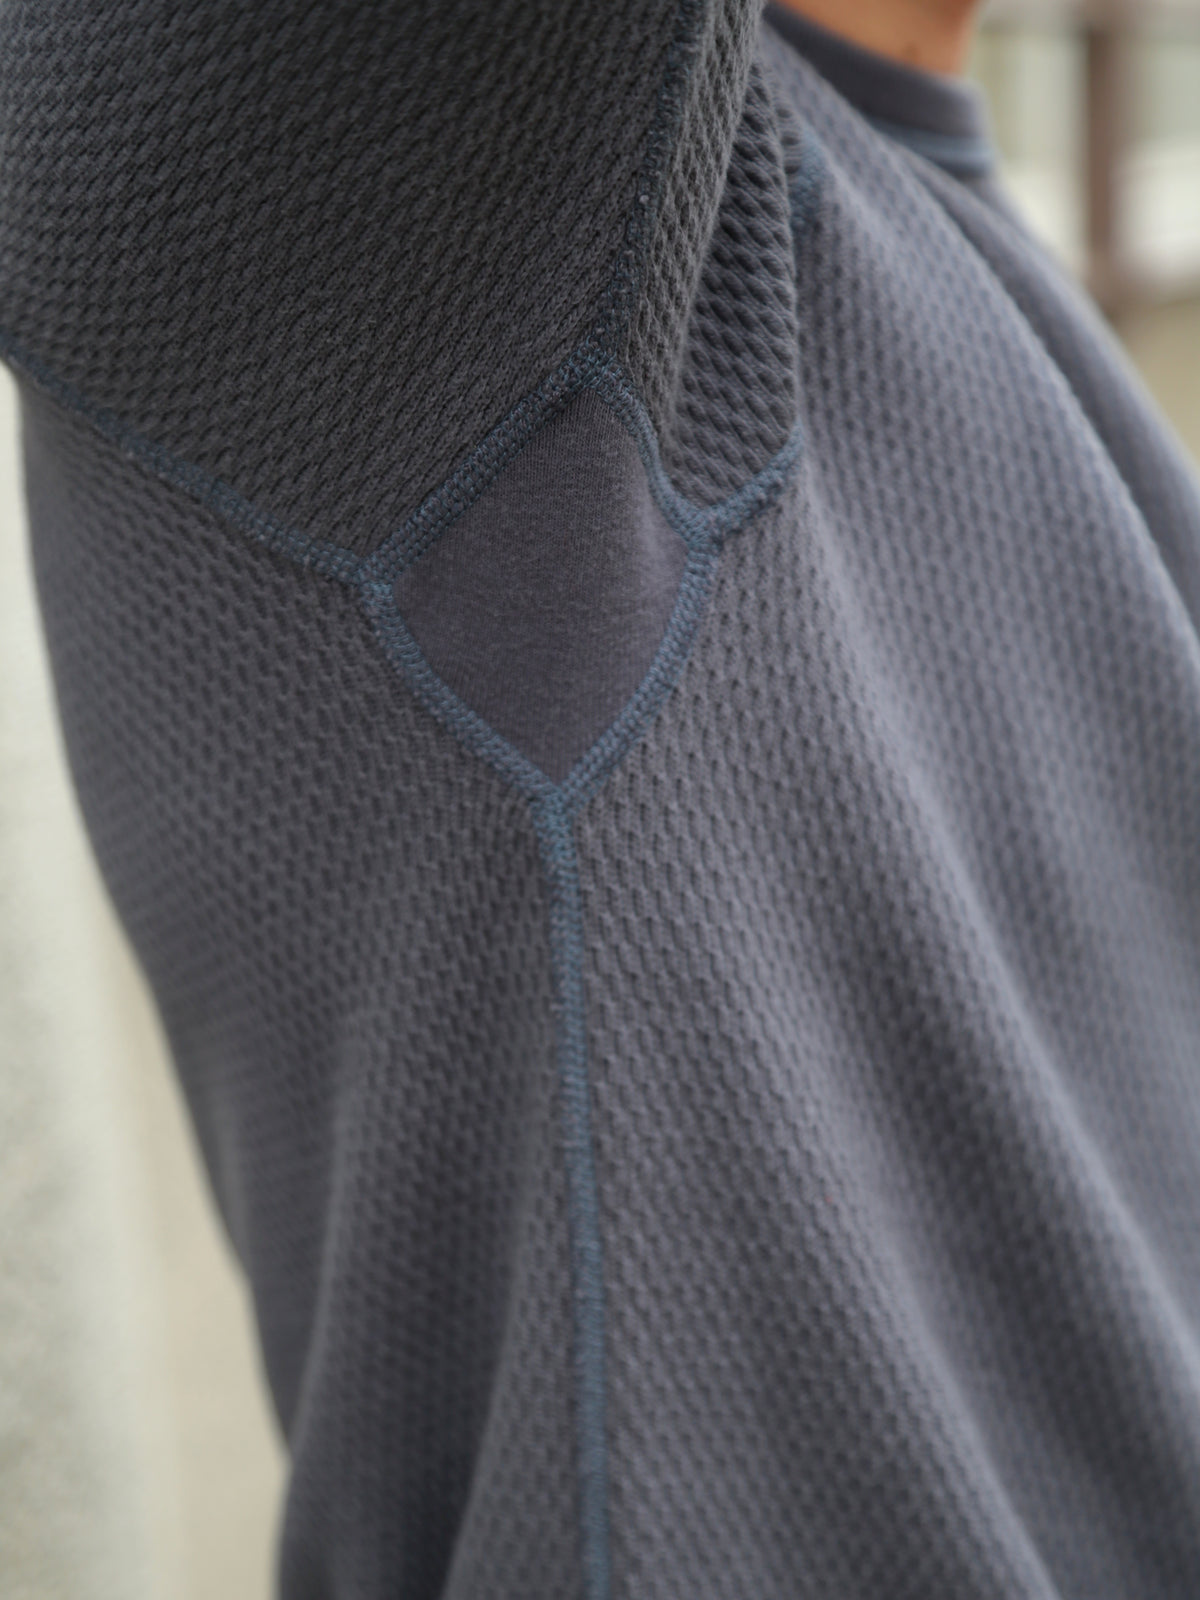 The Real McCoy's Honeycomb Thermal Shirt – Ink Blue (MC23115)